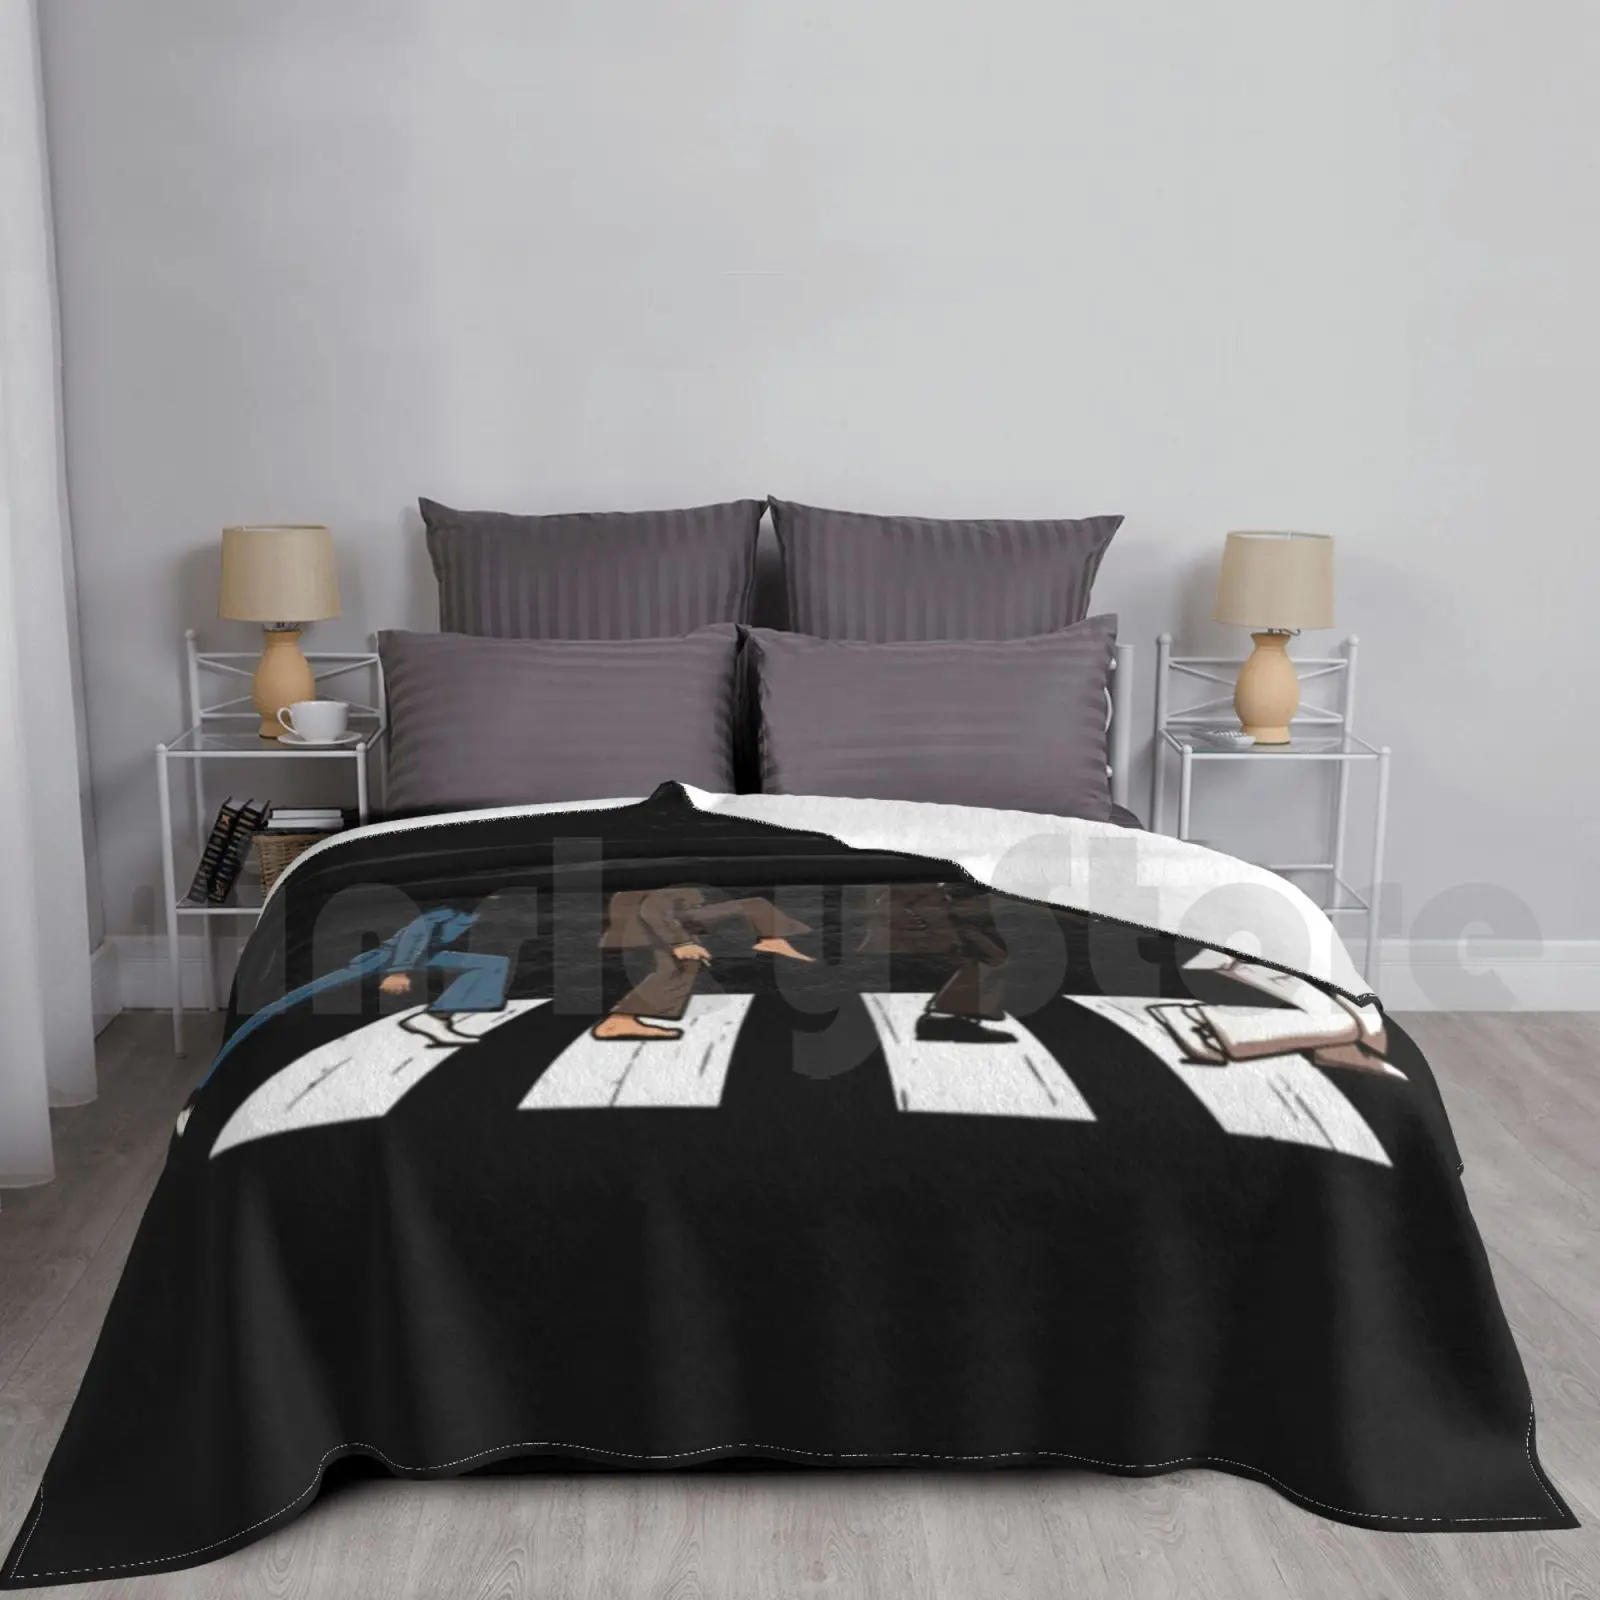 The Cross Blanket For Sofa Bed Travel Road Album Abbey Beatle Music